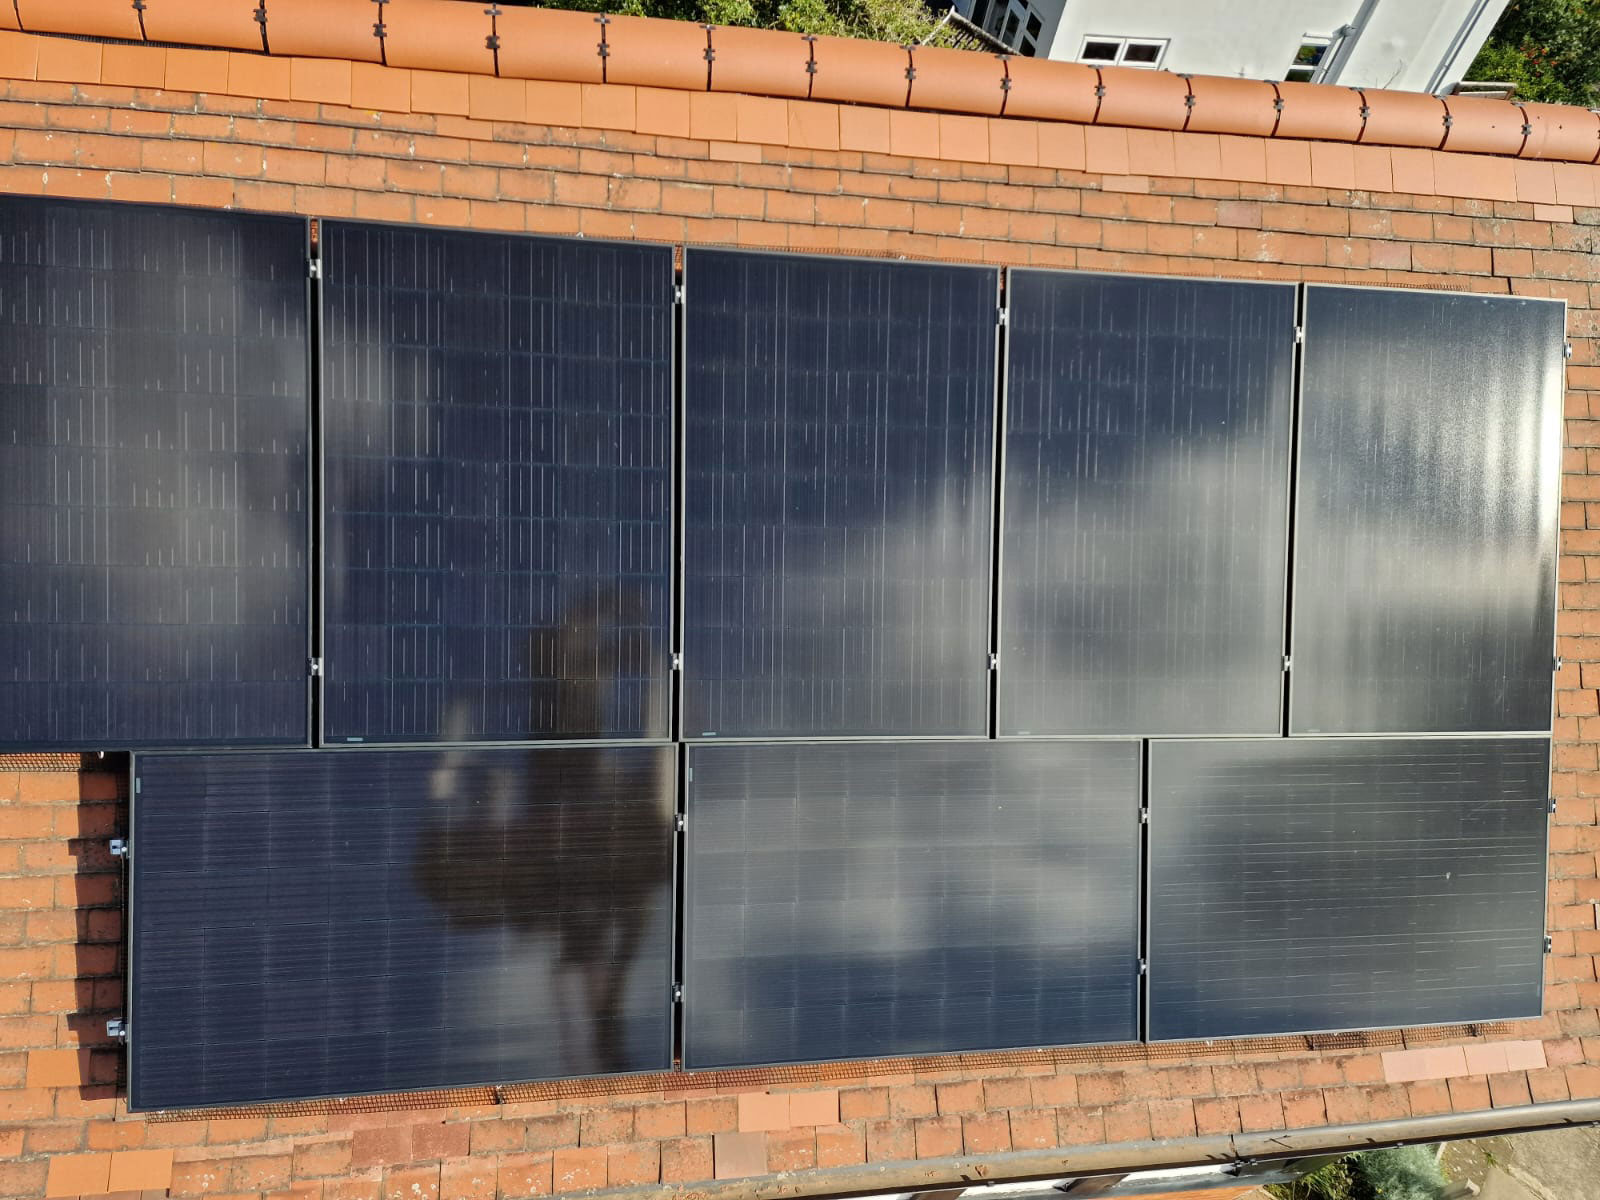 Protecting 3 Sets of Solar panels in Beeston